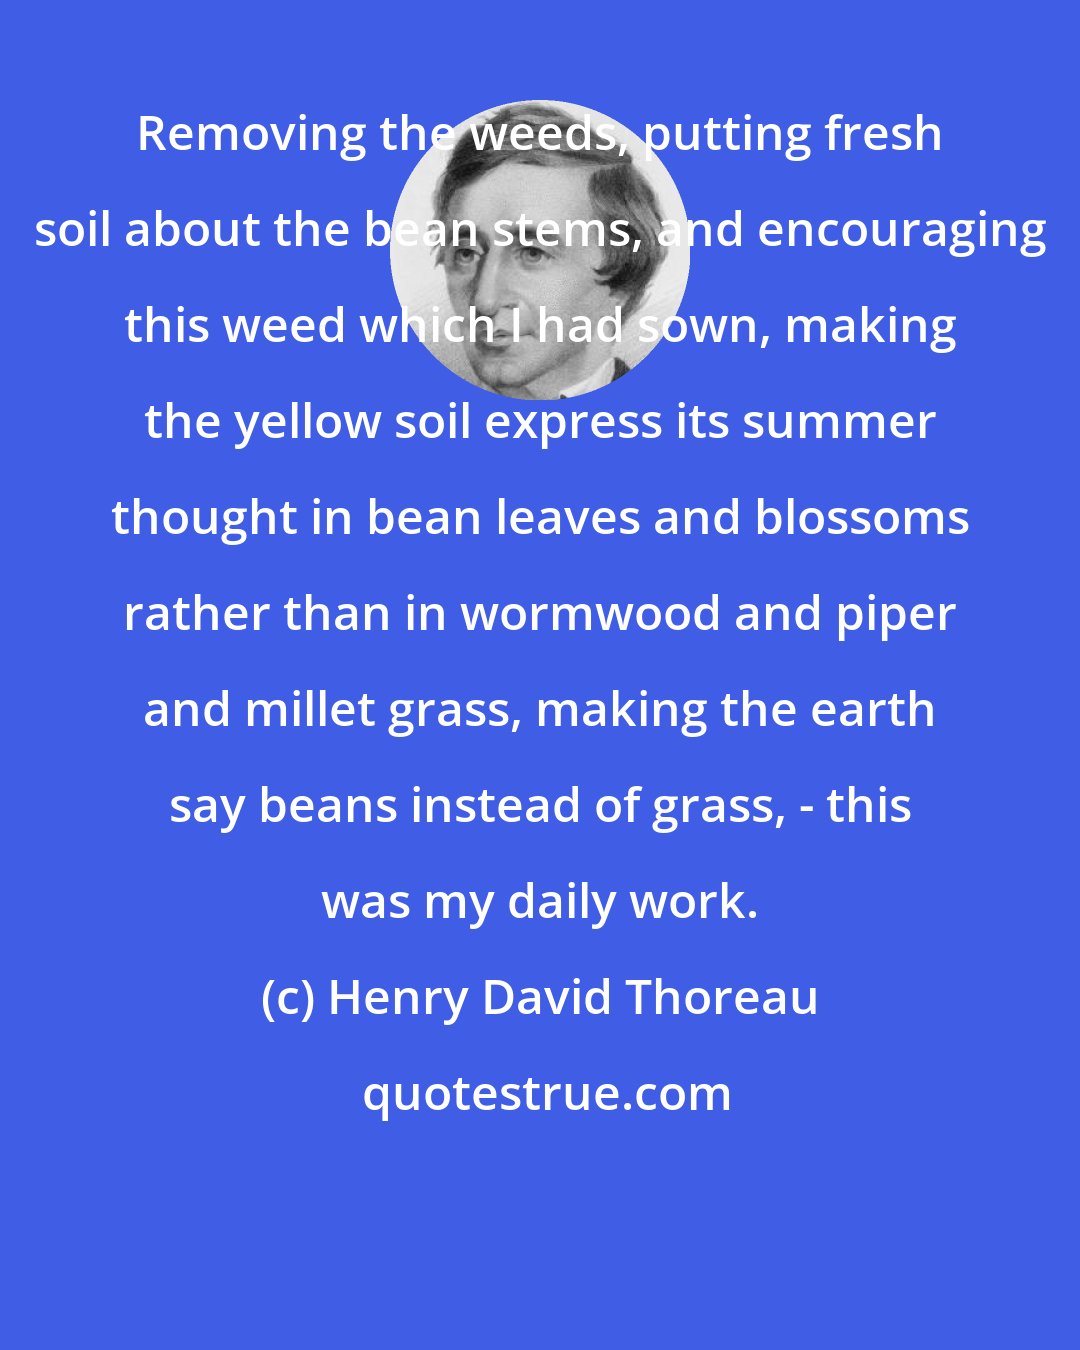 Henry David Thoreau: Removing the weeds, putting fresh soil about the bean stems, and encouraging this weed which I had sown, making the yellow soil express its summer thought in bean leaves and blossoms rather than in wormwood and piper and millet grass, making the earth say beans instead of grass, - this was my daily work.